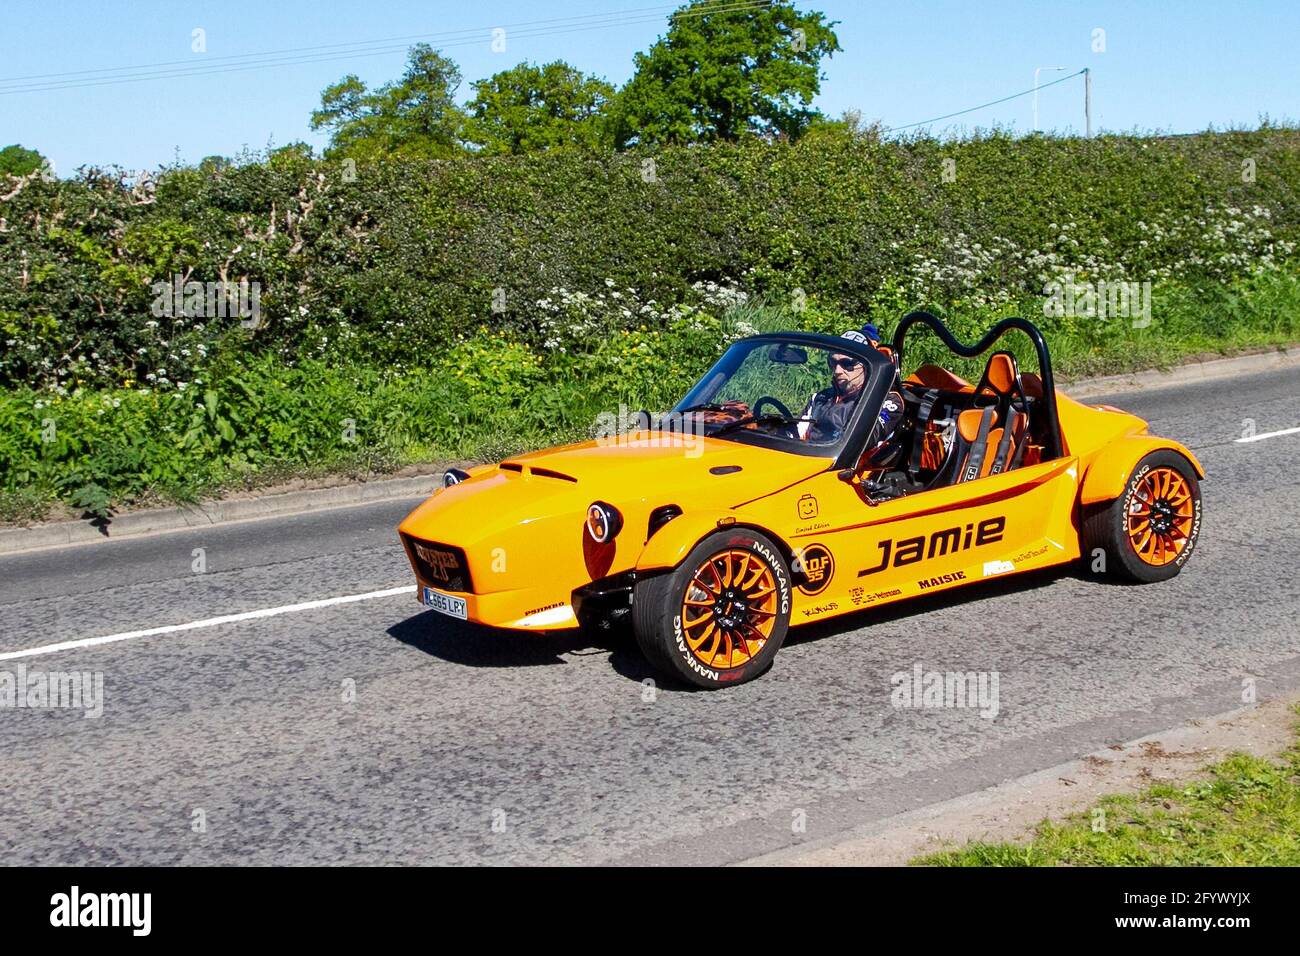 2017 Mev Mevster orange Jamie kit car; A limited edition rare car based on  the Mazda MX5. traffic, moving vehicles, cars, vehicle driving, UK roads,  motors, motoring en-route to Capesthorne Hall classic